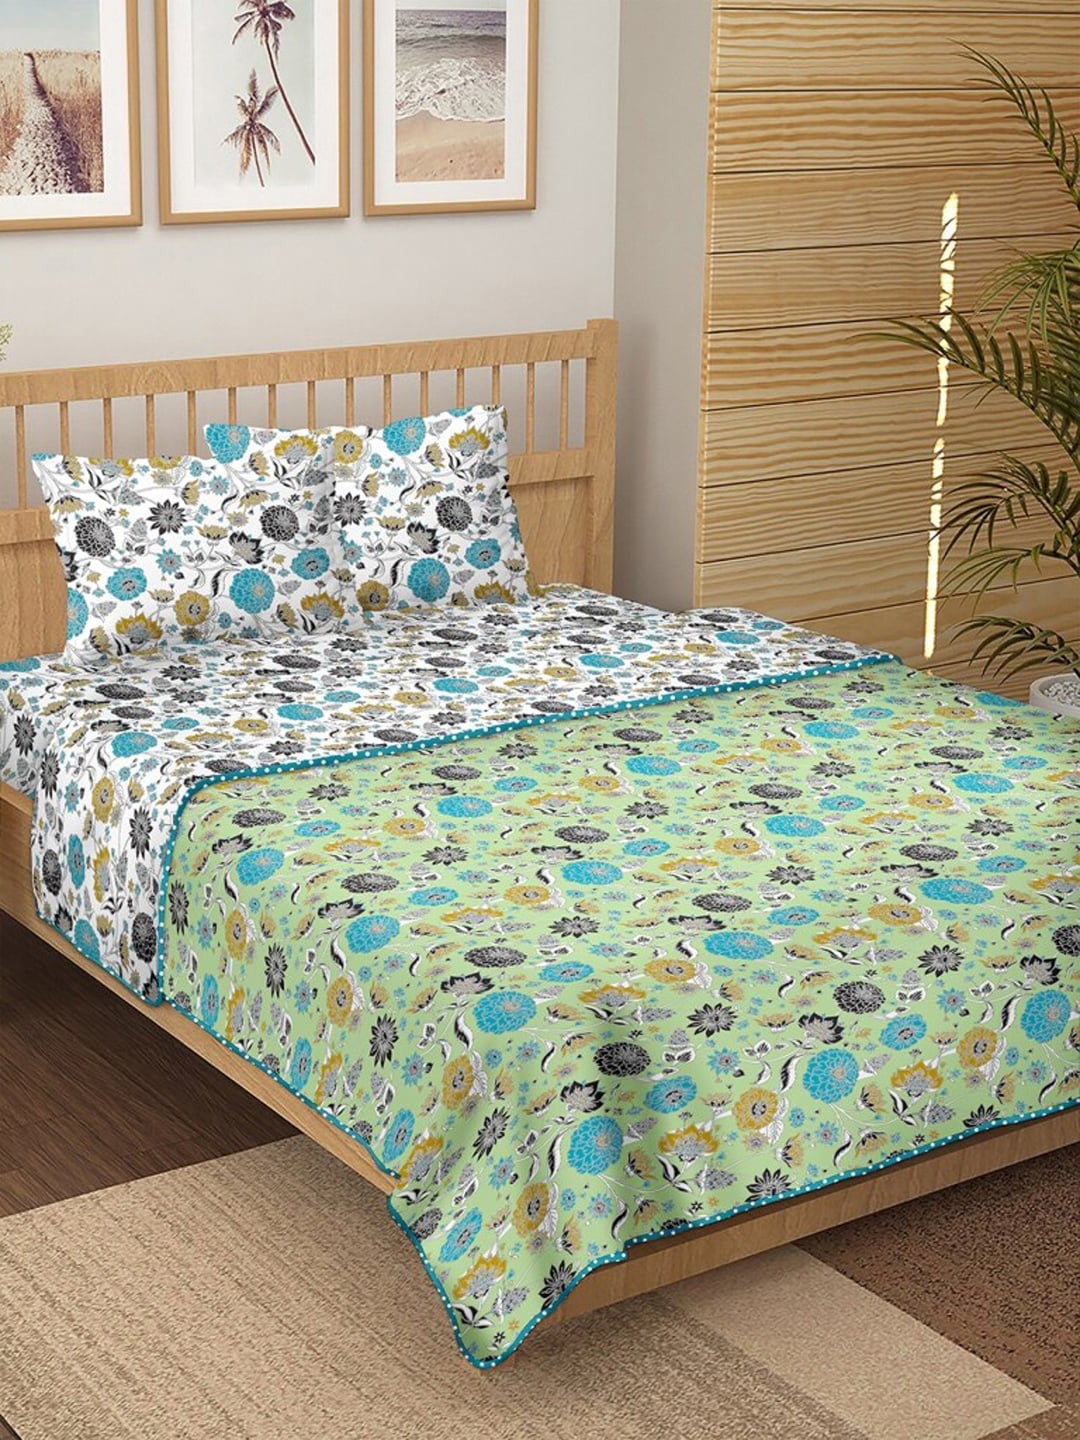 BELLA CASA White & Blue Floral Printed Cotton 150 TC Double King Bedding Set Price in India